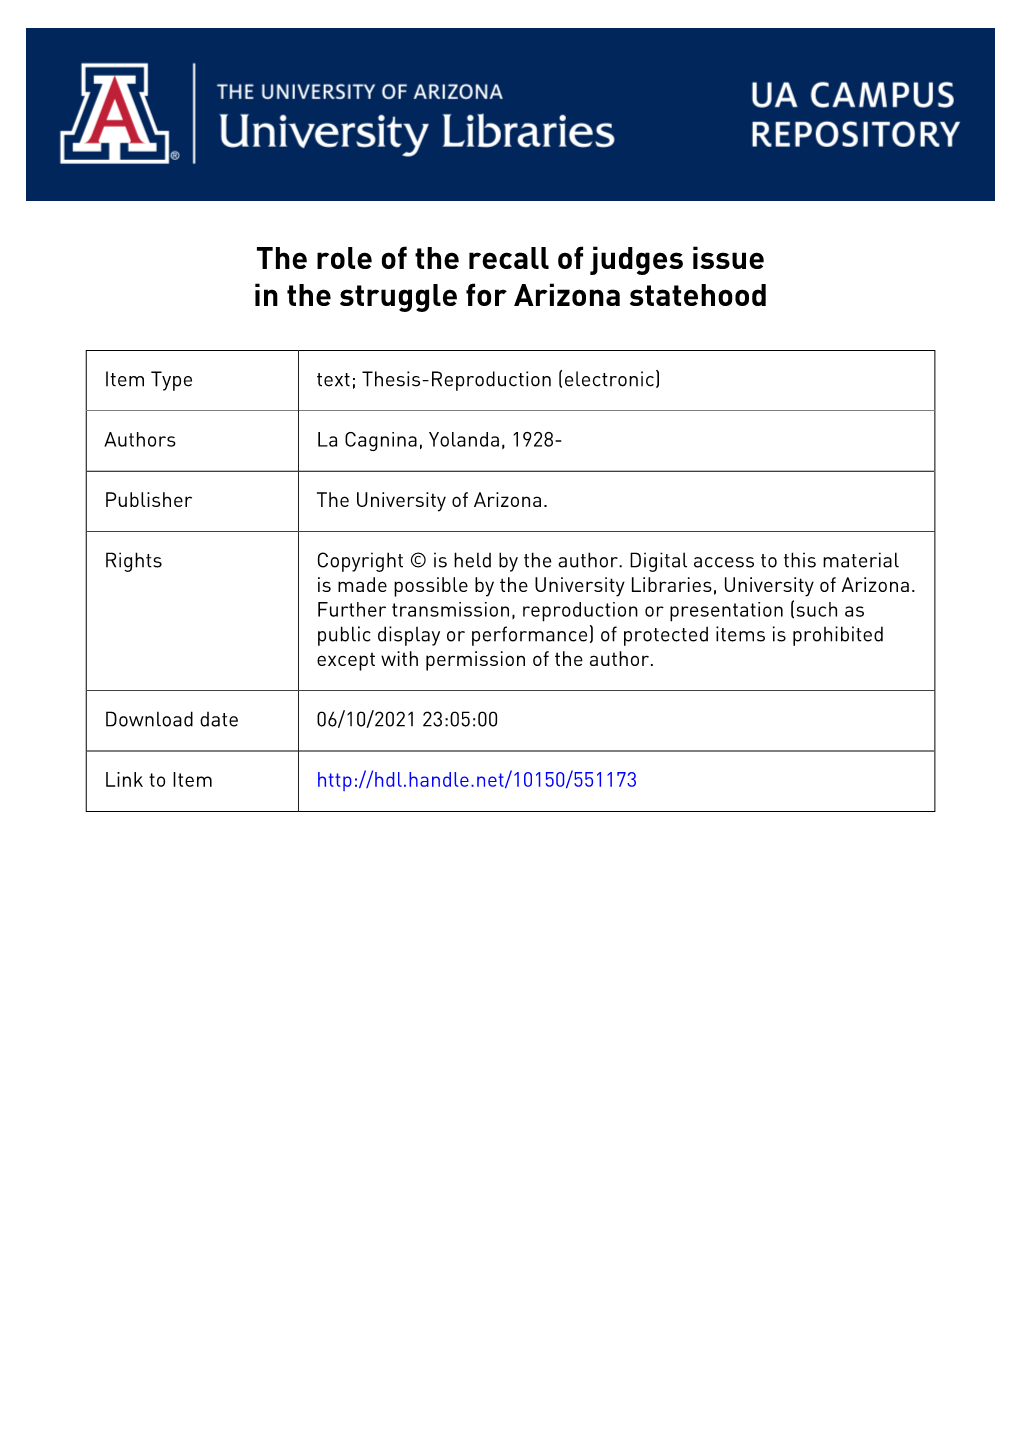 The Bole of the Recall of Judges Issue in the Struggle for Arizona Statehood